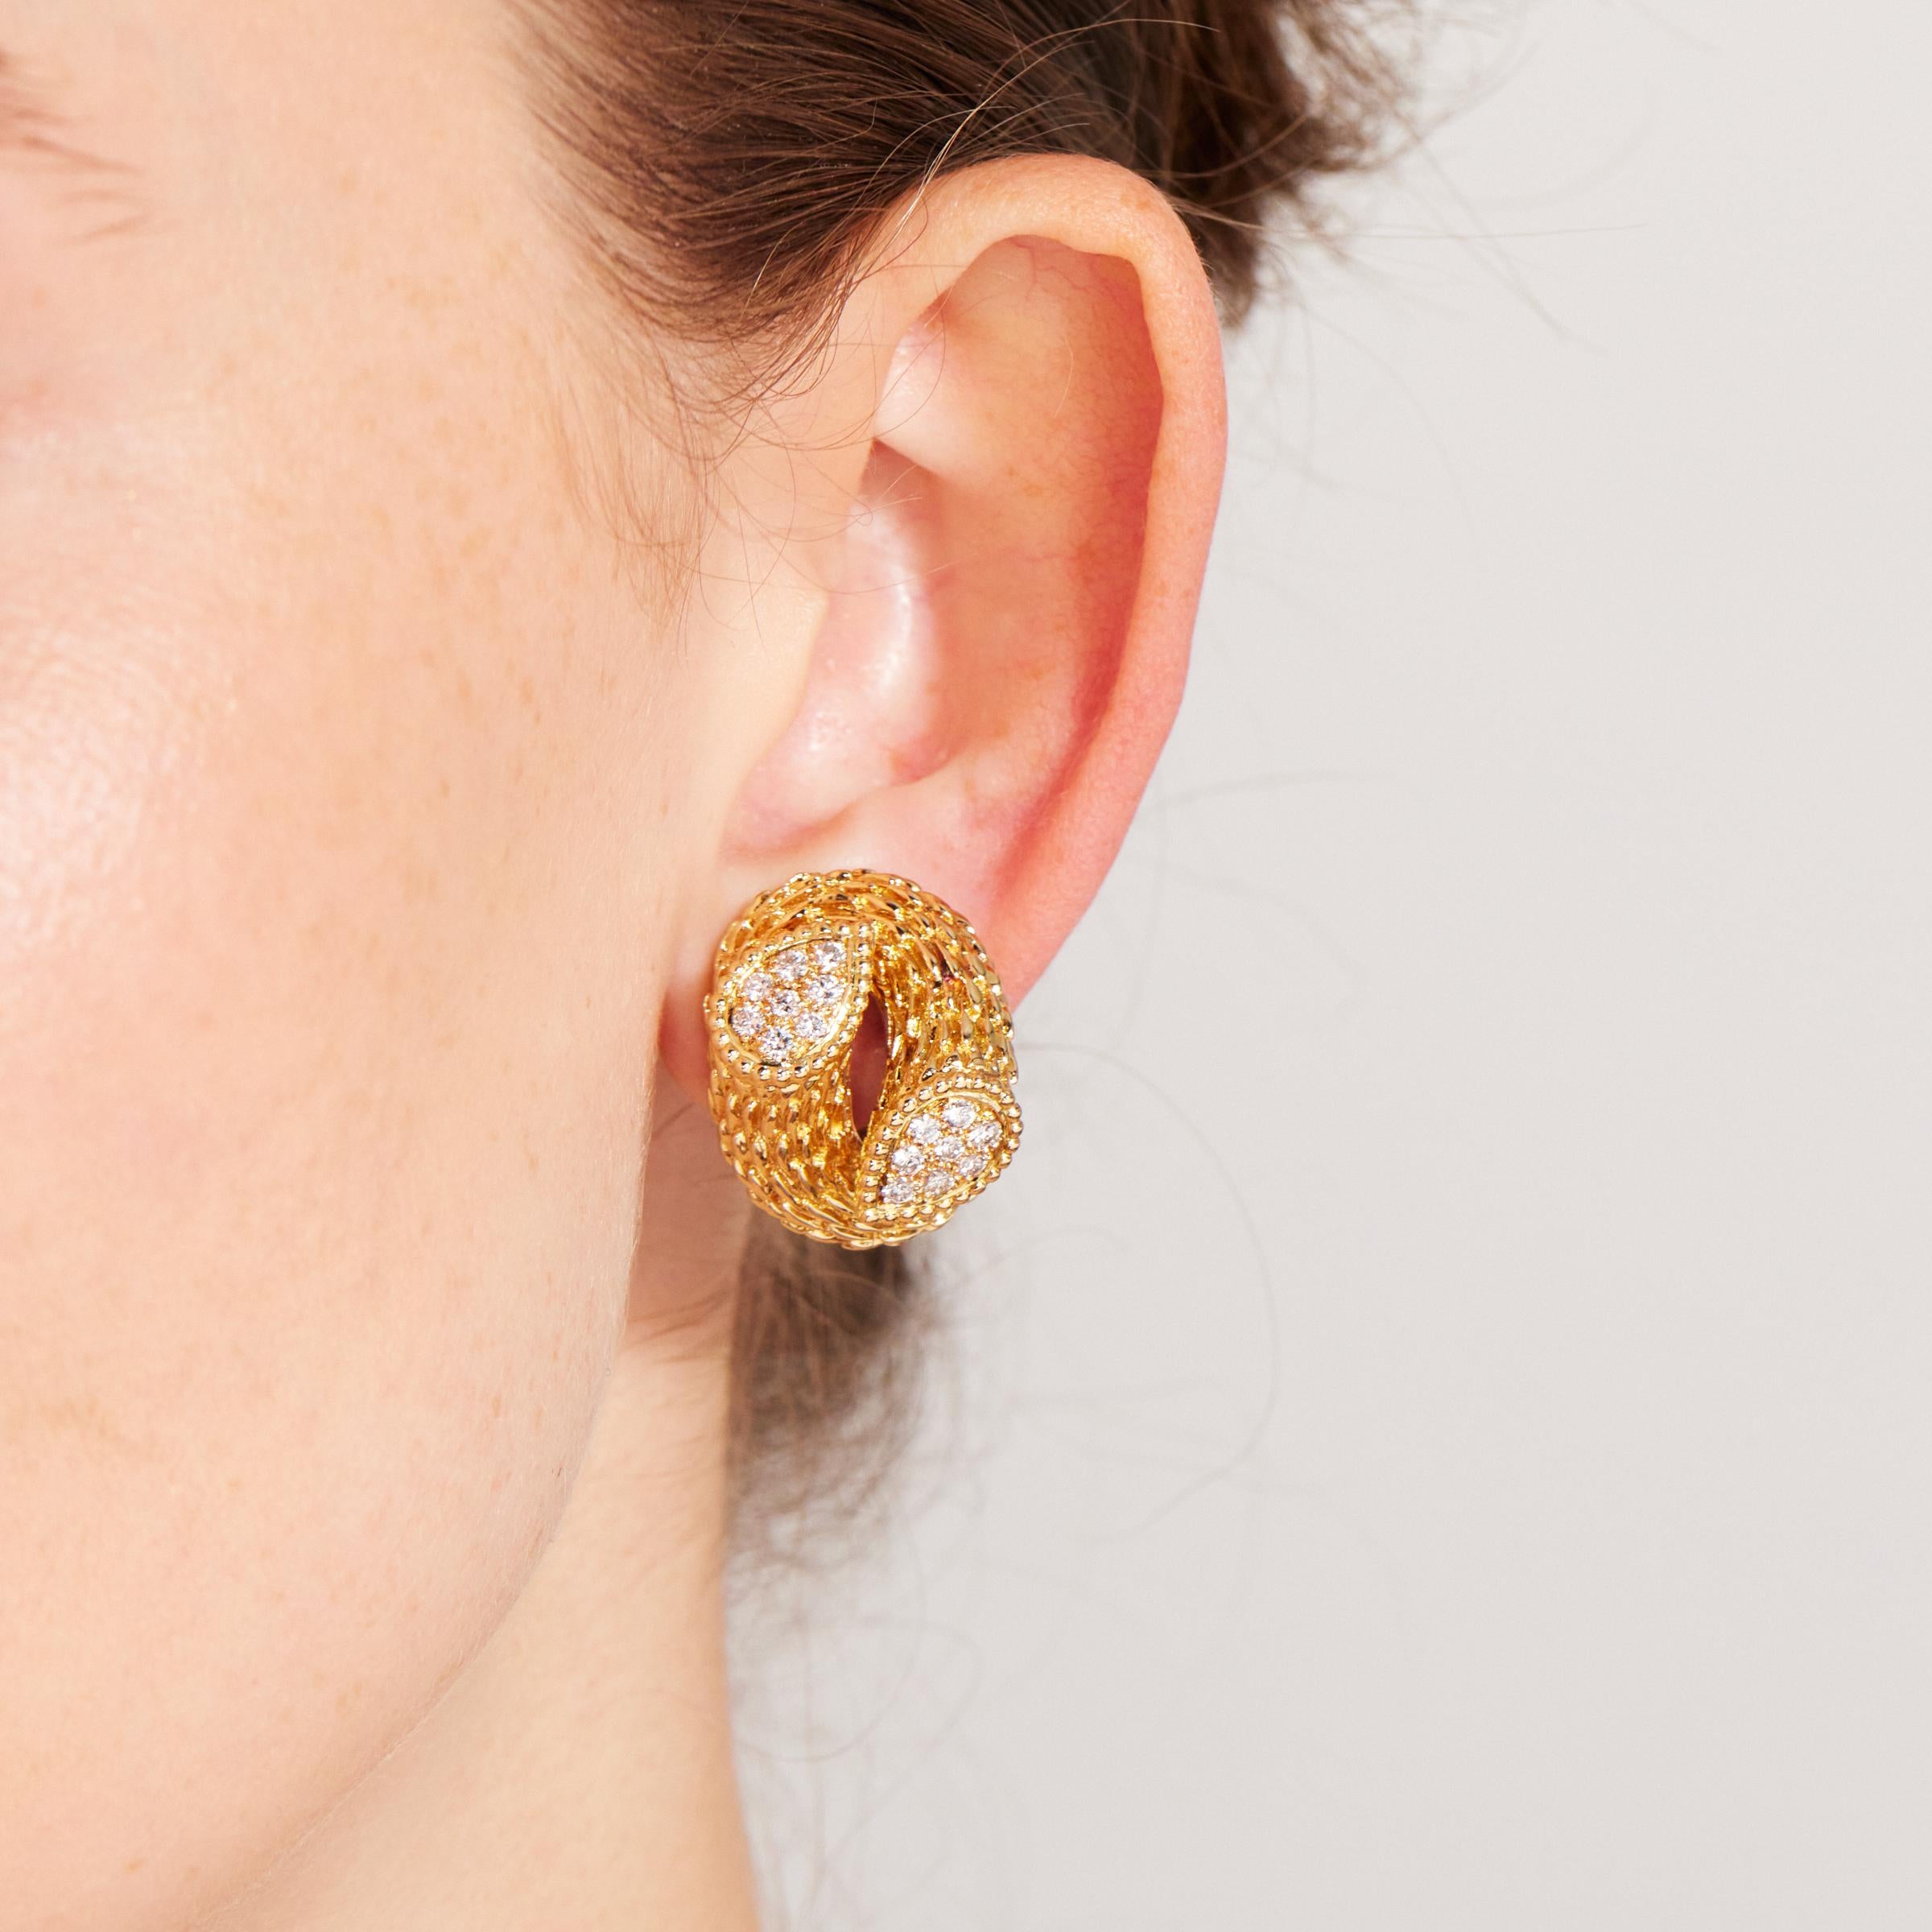 Beautifully crafted pair of Boucheron Serpent Boheme earrings in 18 karat yellow gold and featuring approximately 1.3 carats of sparkling pave-set diamonds. The Serpent Boheme collection was launched by the Paris-based jeweler in 1968 and has become